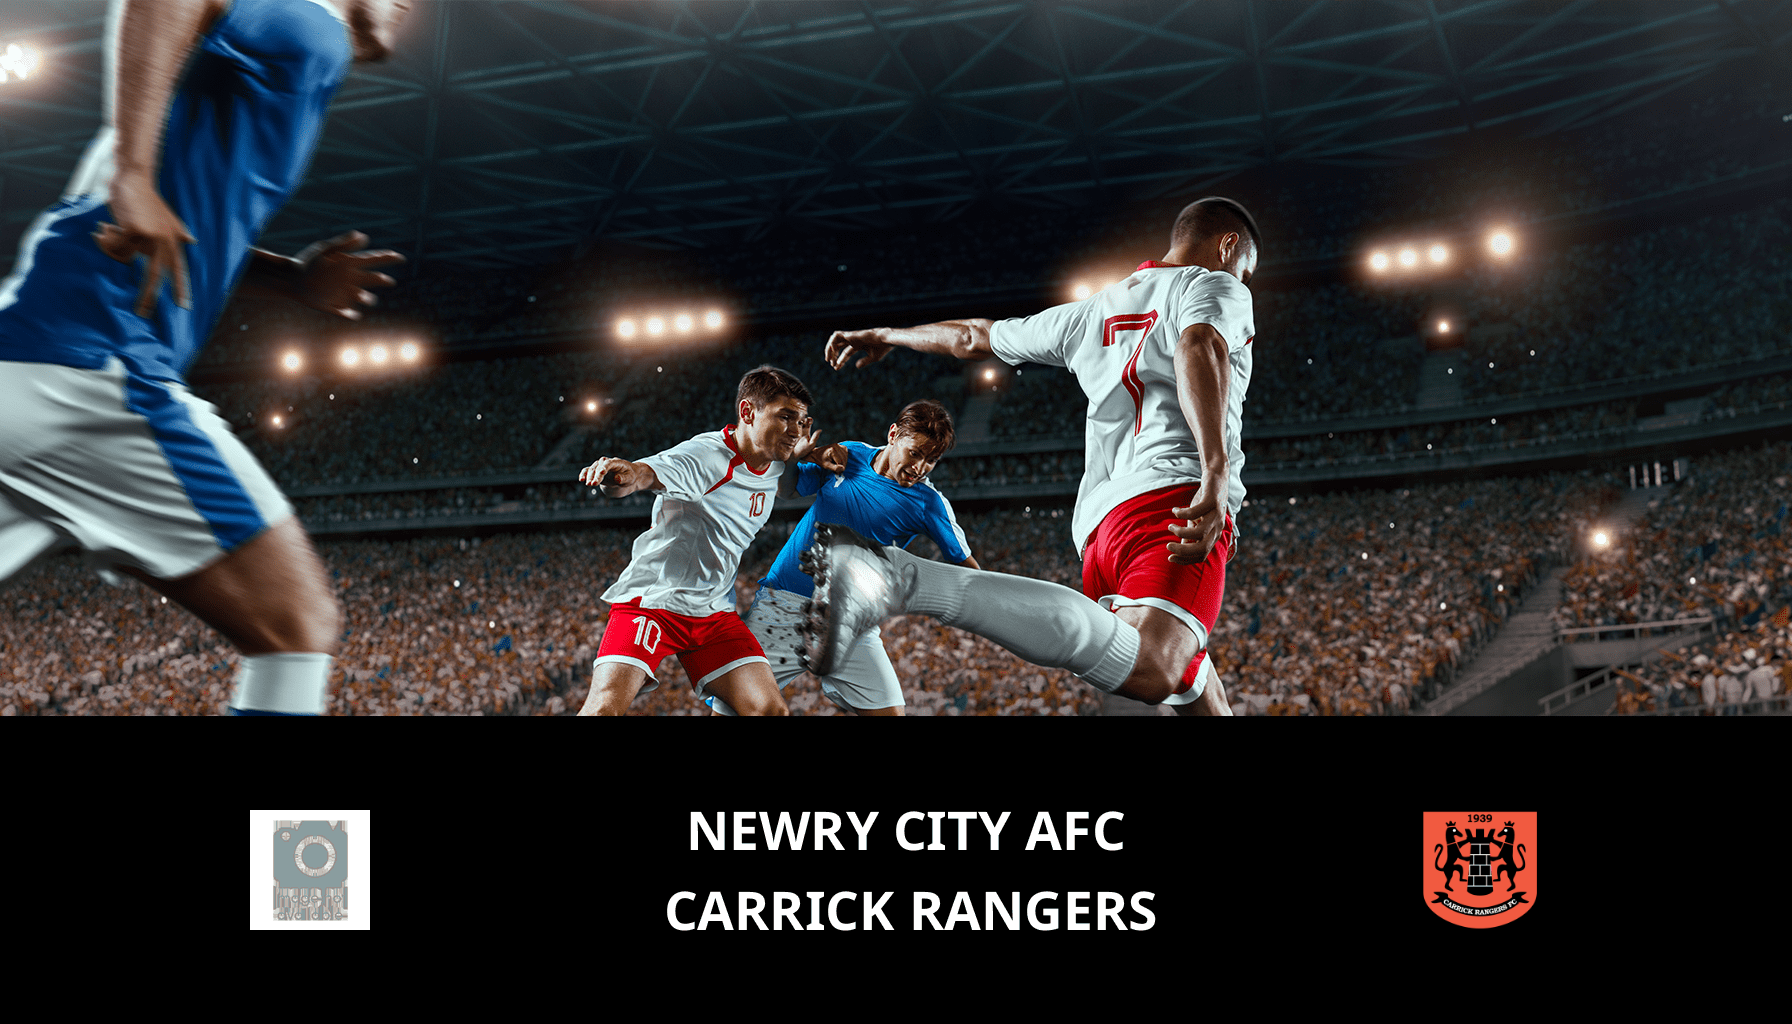 Previsione per Newry City AFC VS Carrick Rangers il 16/04/2024 Analysis of the match